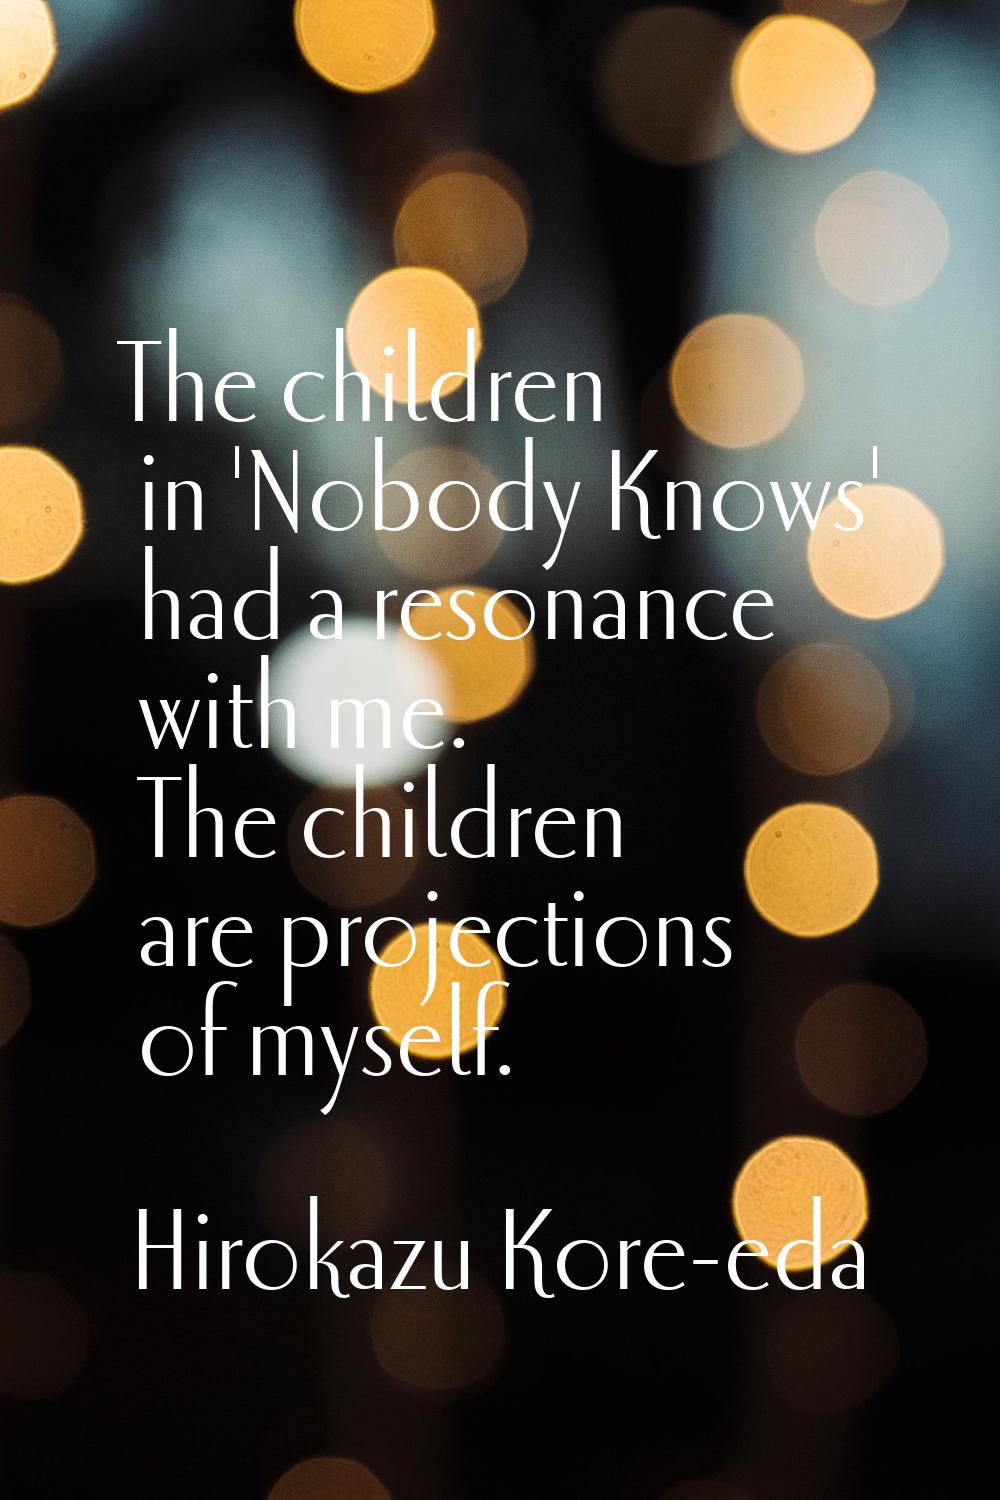 The children in 'Nobody Knows' had a resonance with me. The children are projections of myself.